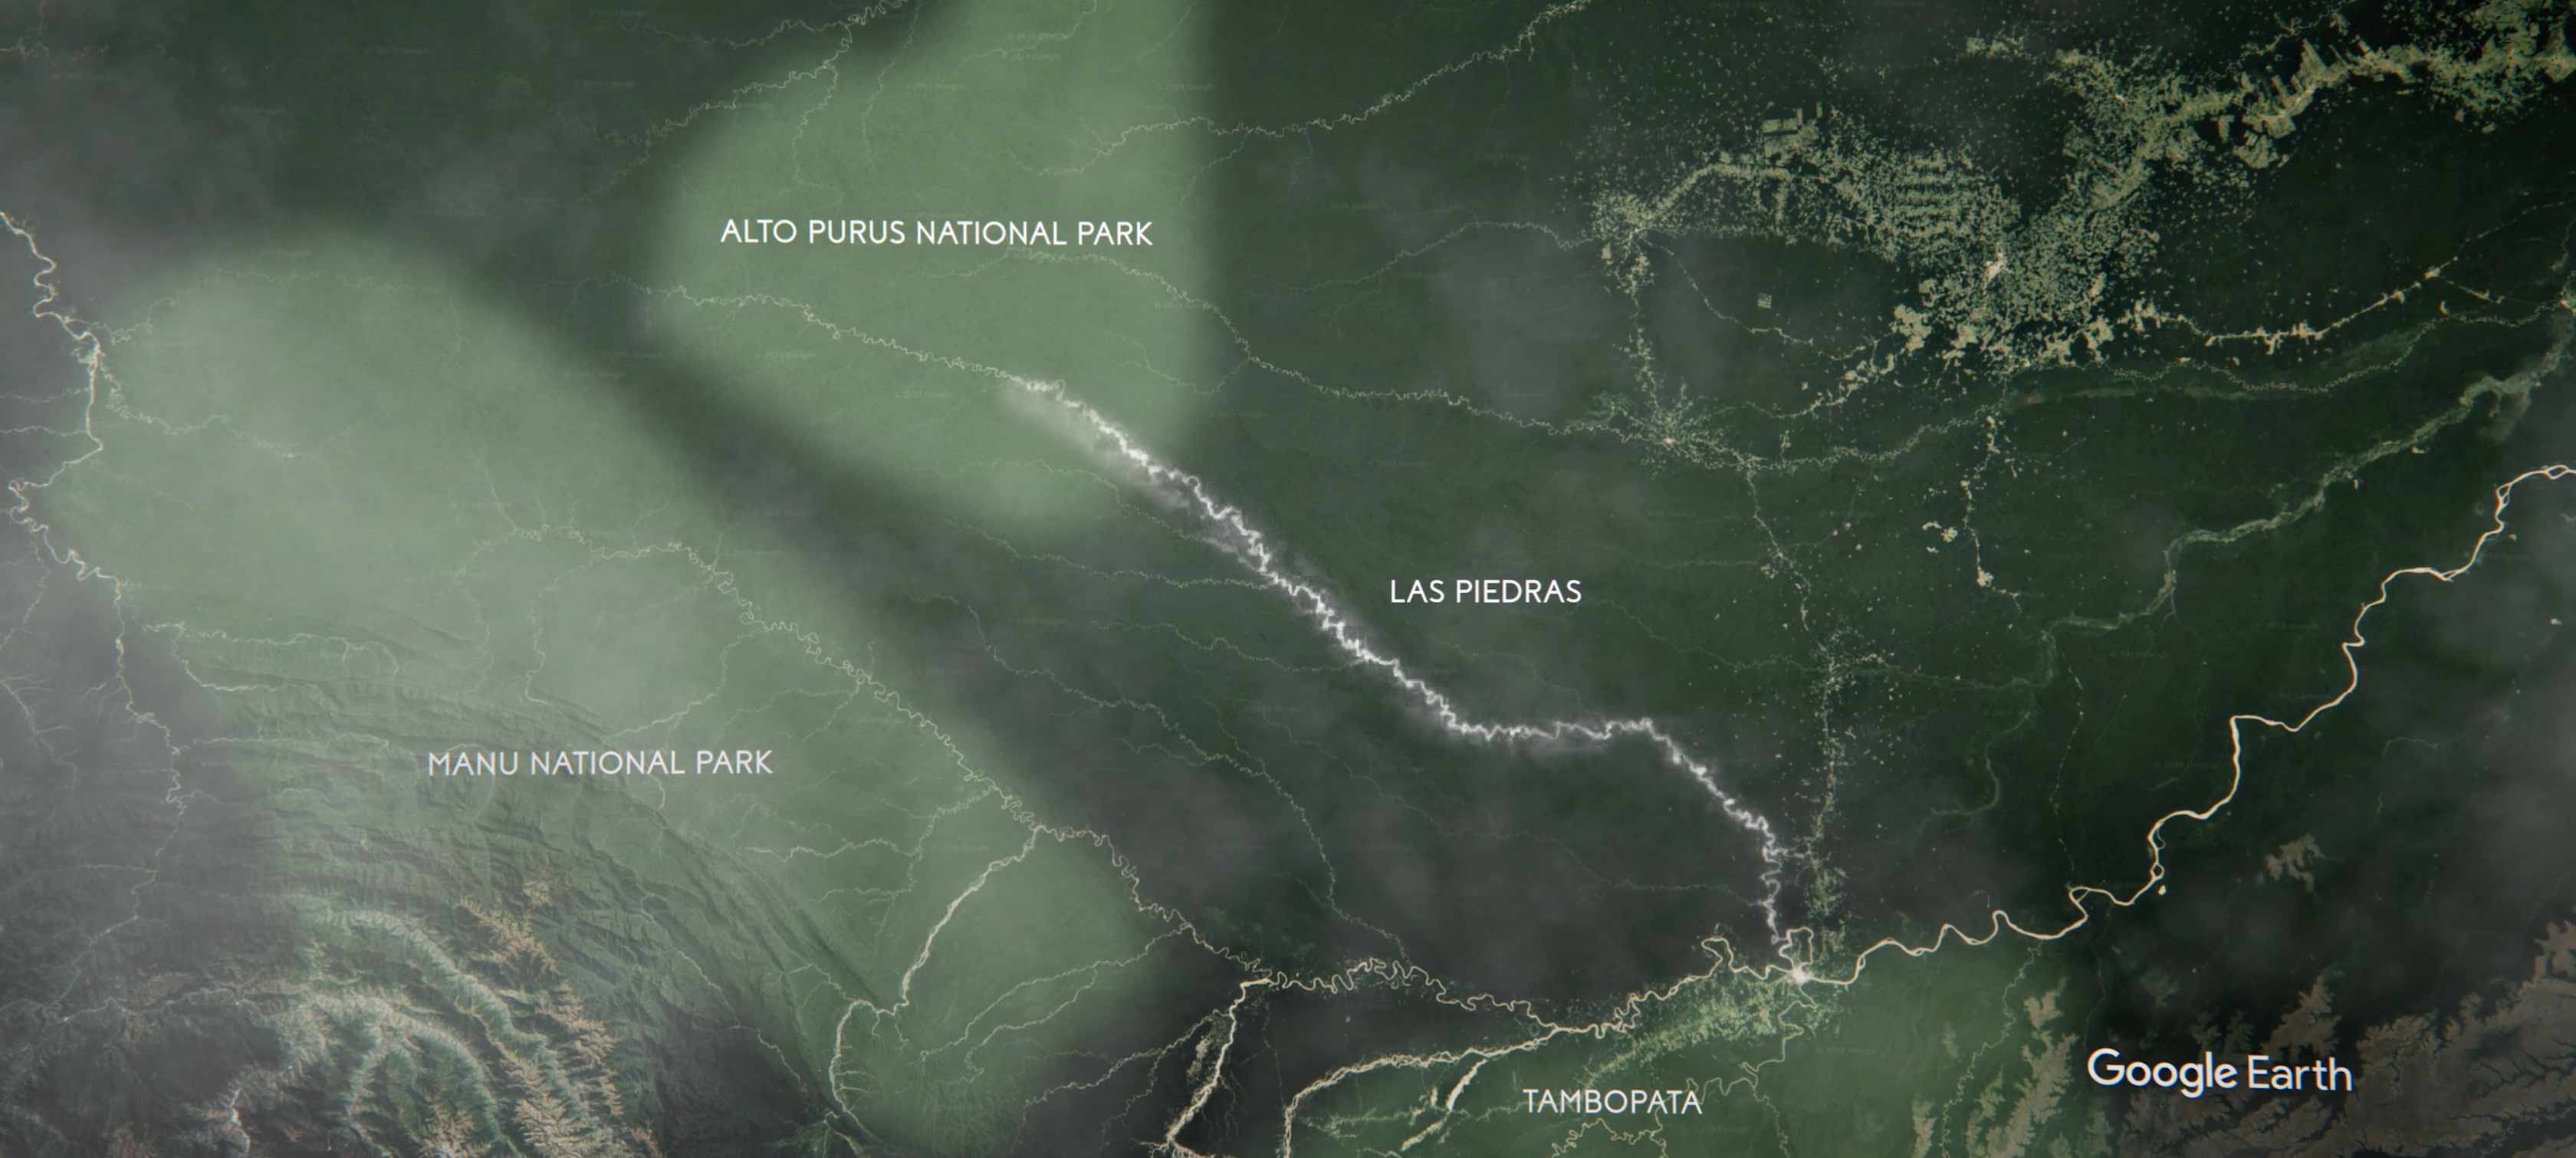 This image shows a satellite picture of three national parks in the Amazon Jungle with Las Piedras running through